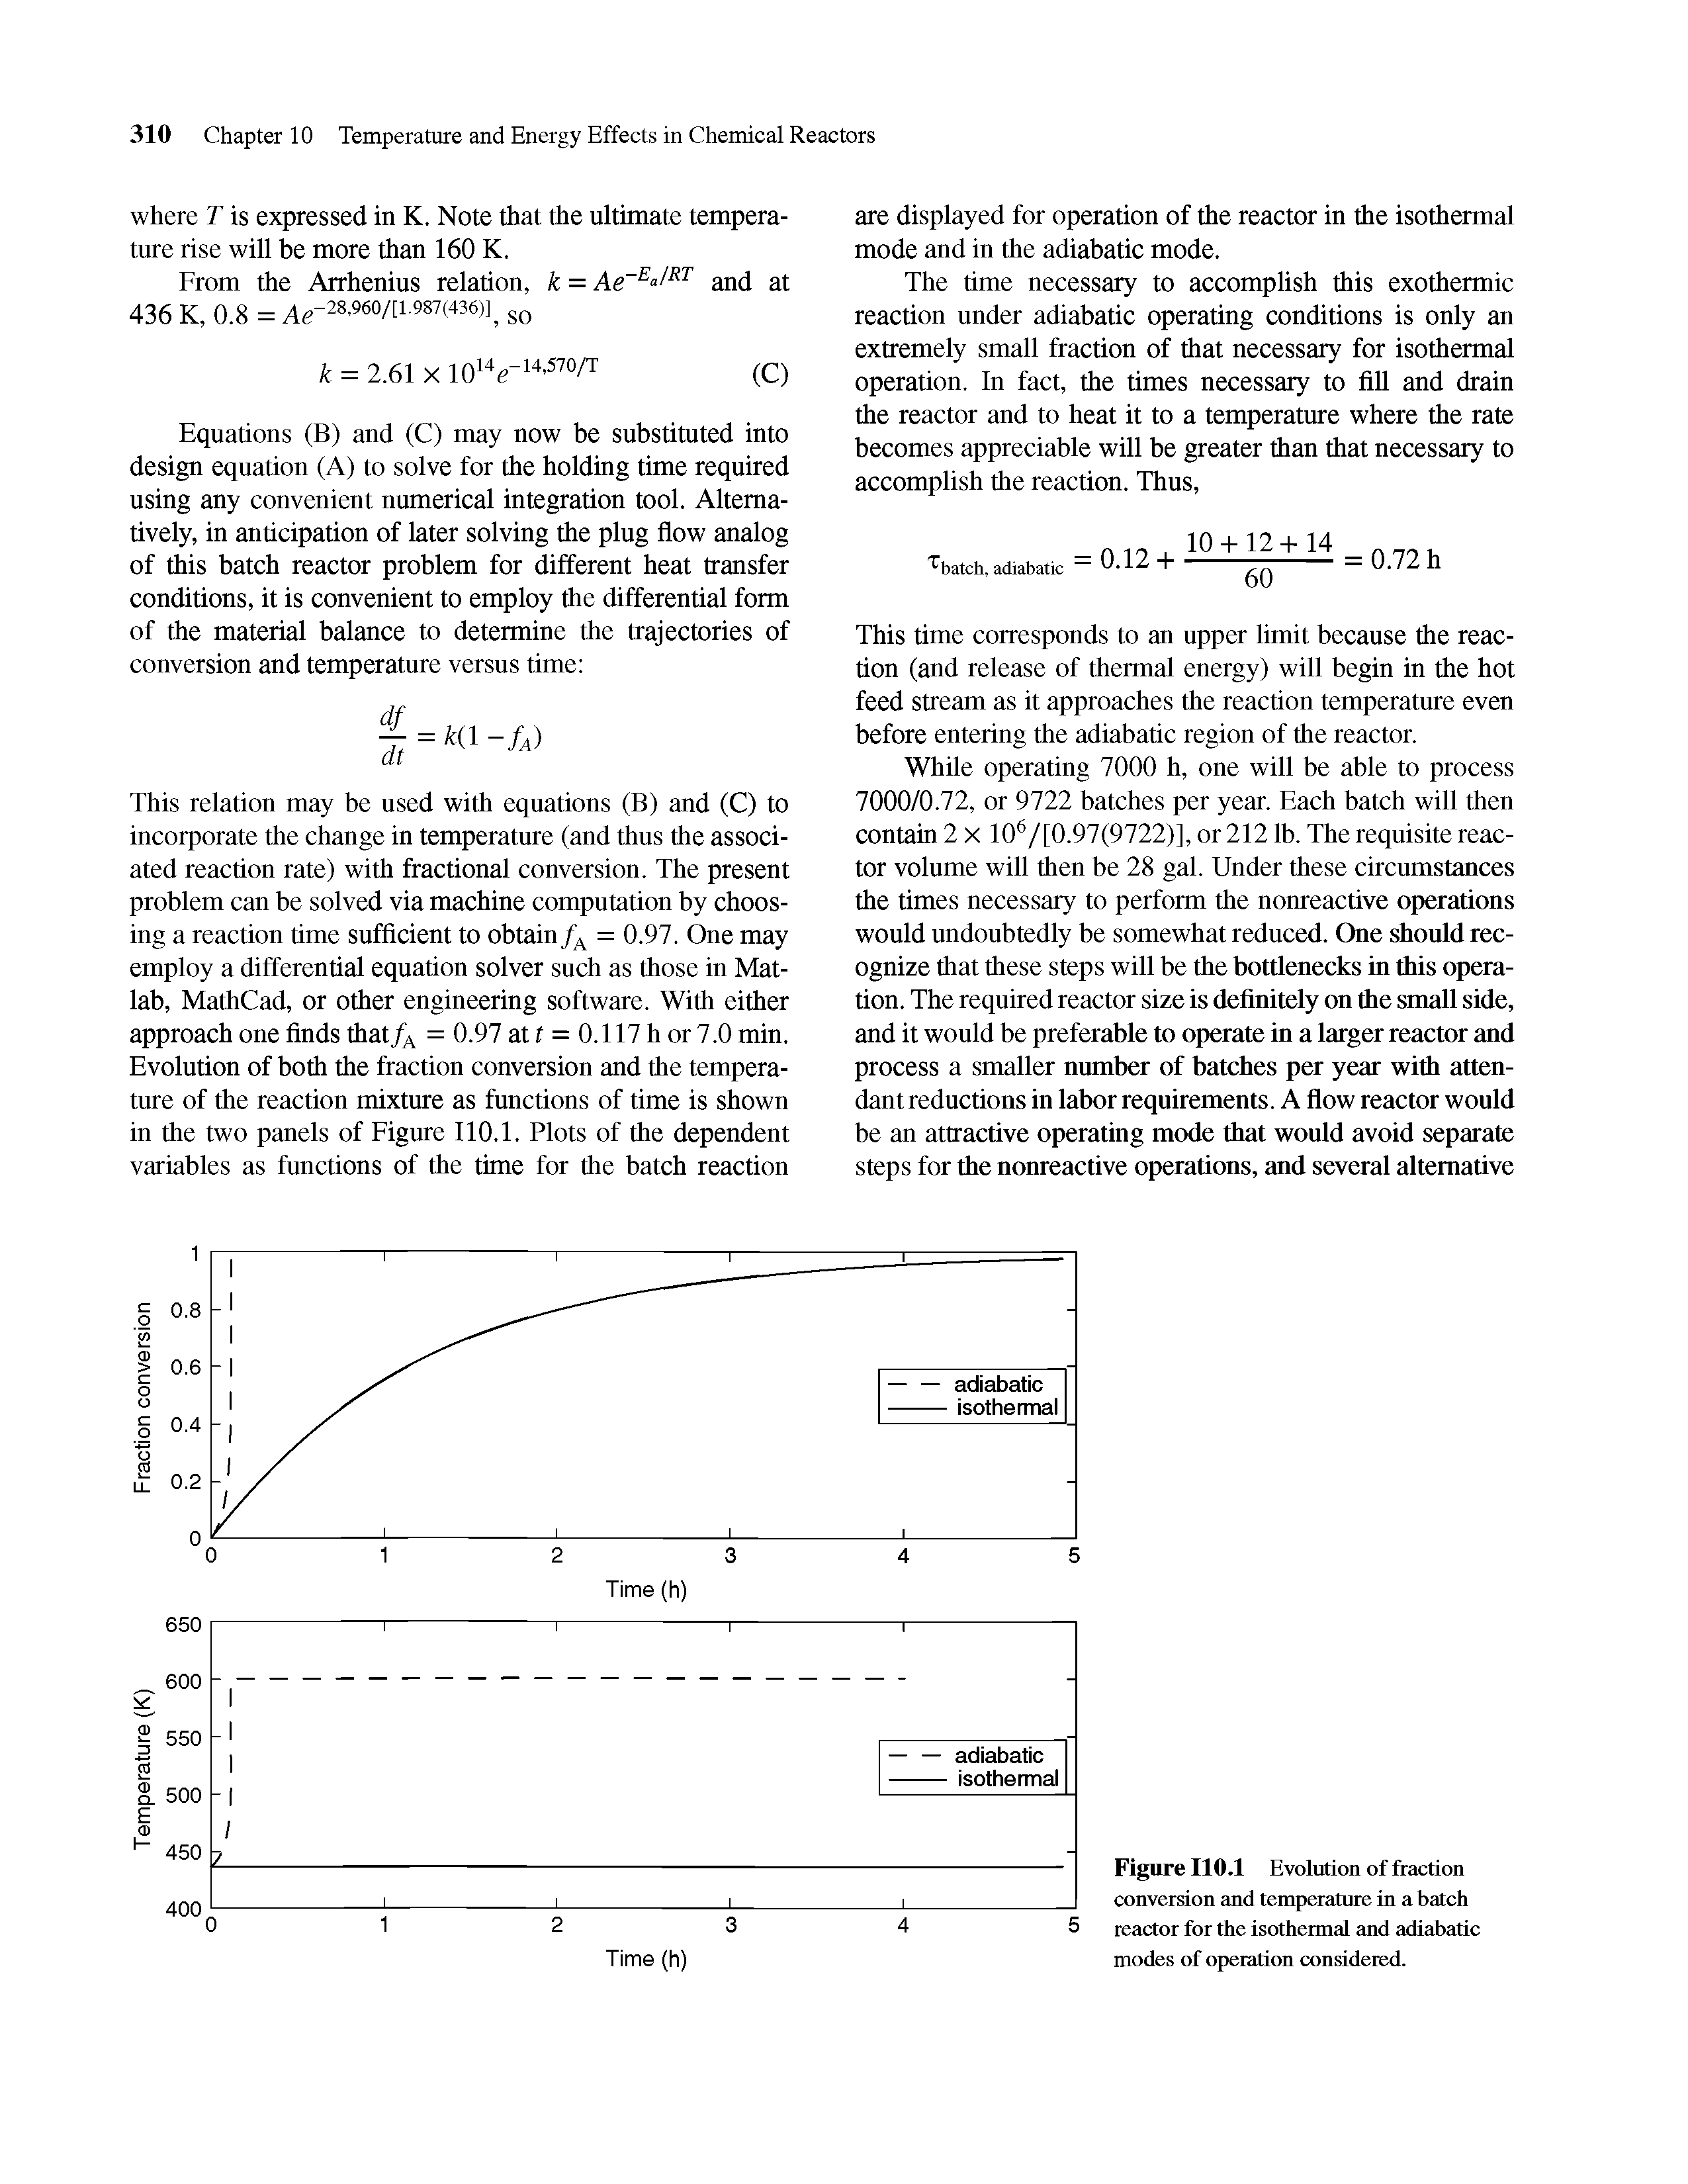 Figure IlO.l Evolution of fraction conversion and temperature in a batch reactor for the isothermal and adiabatic modes of operation considered.